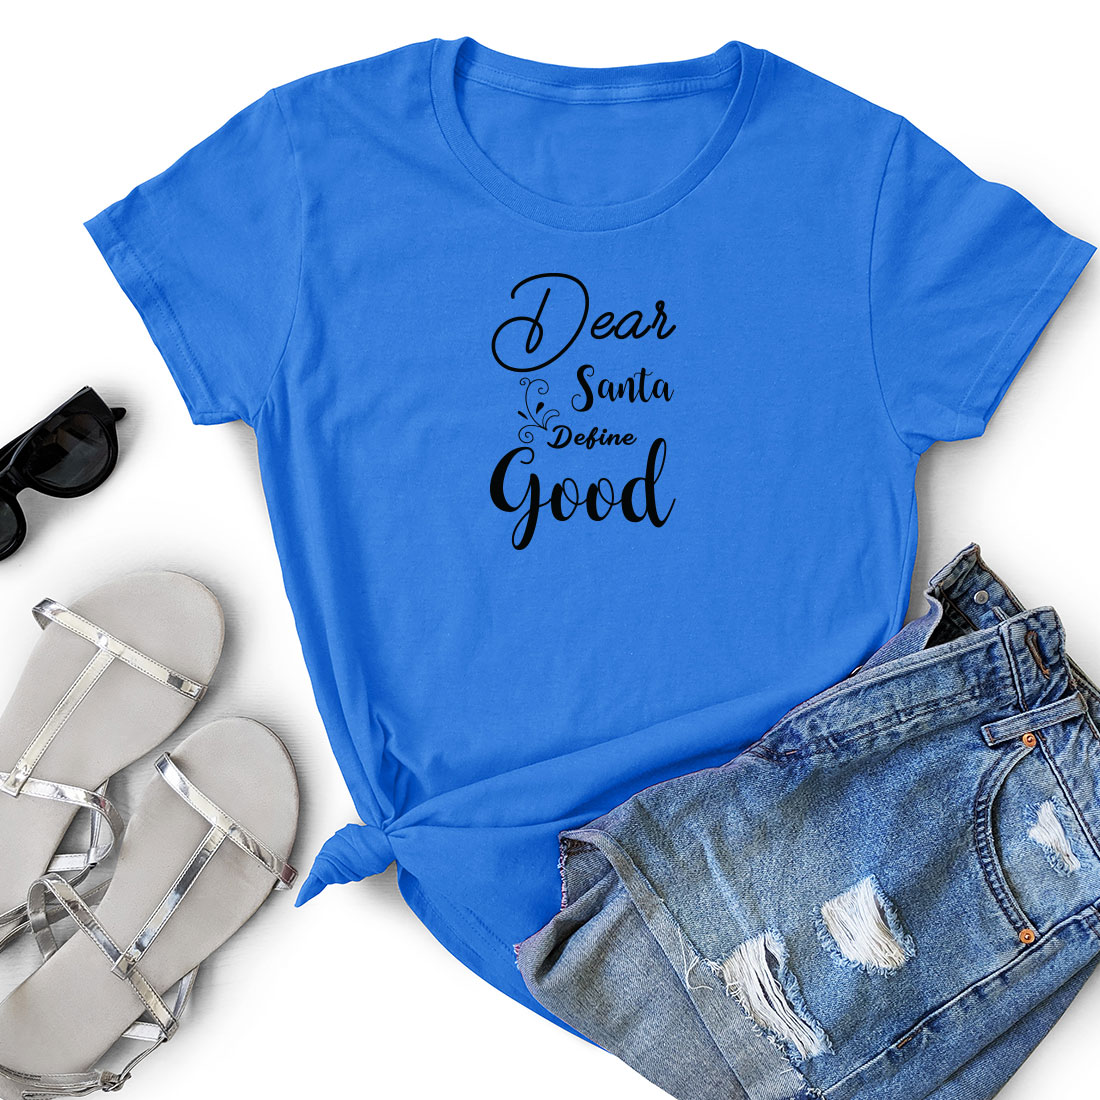 T - shirt that says dear santa and be good next to a pair of.